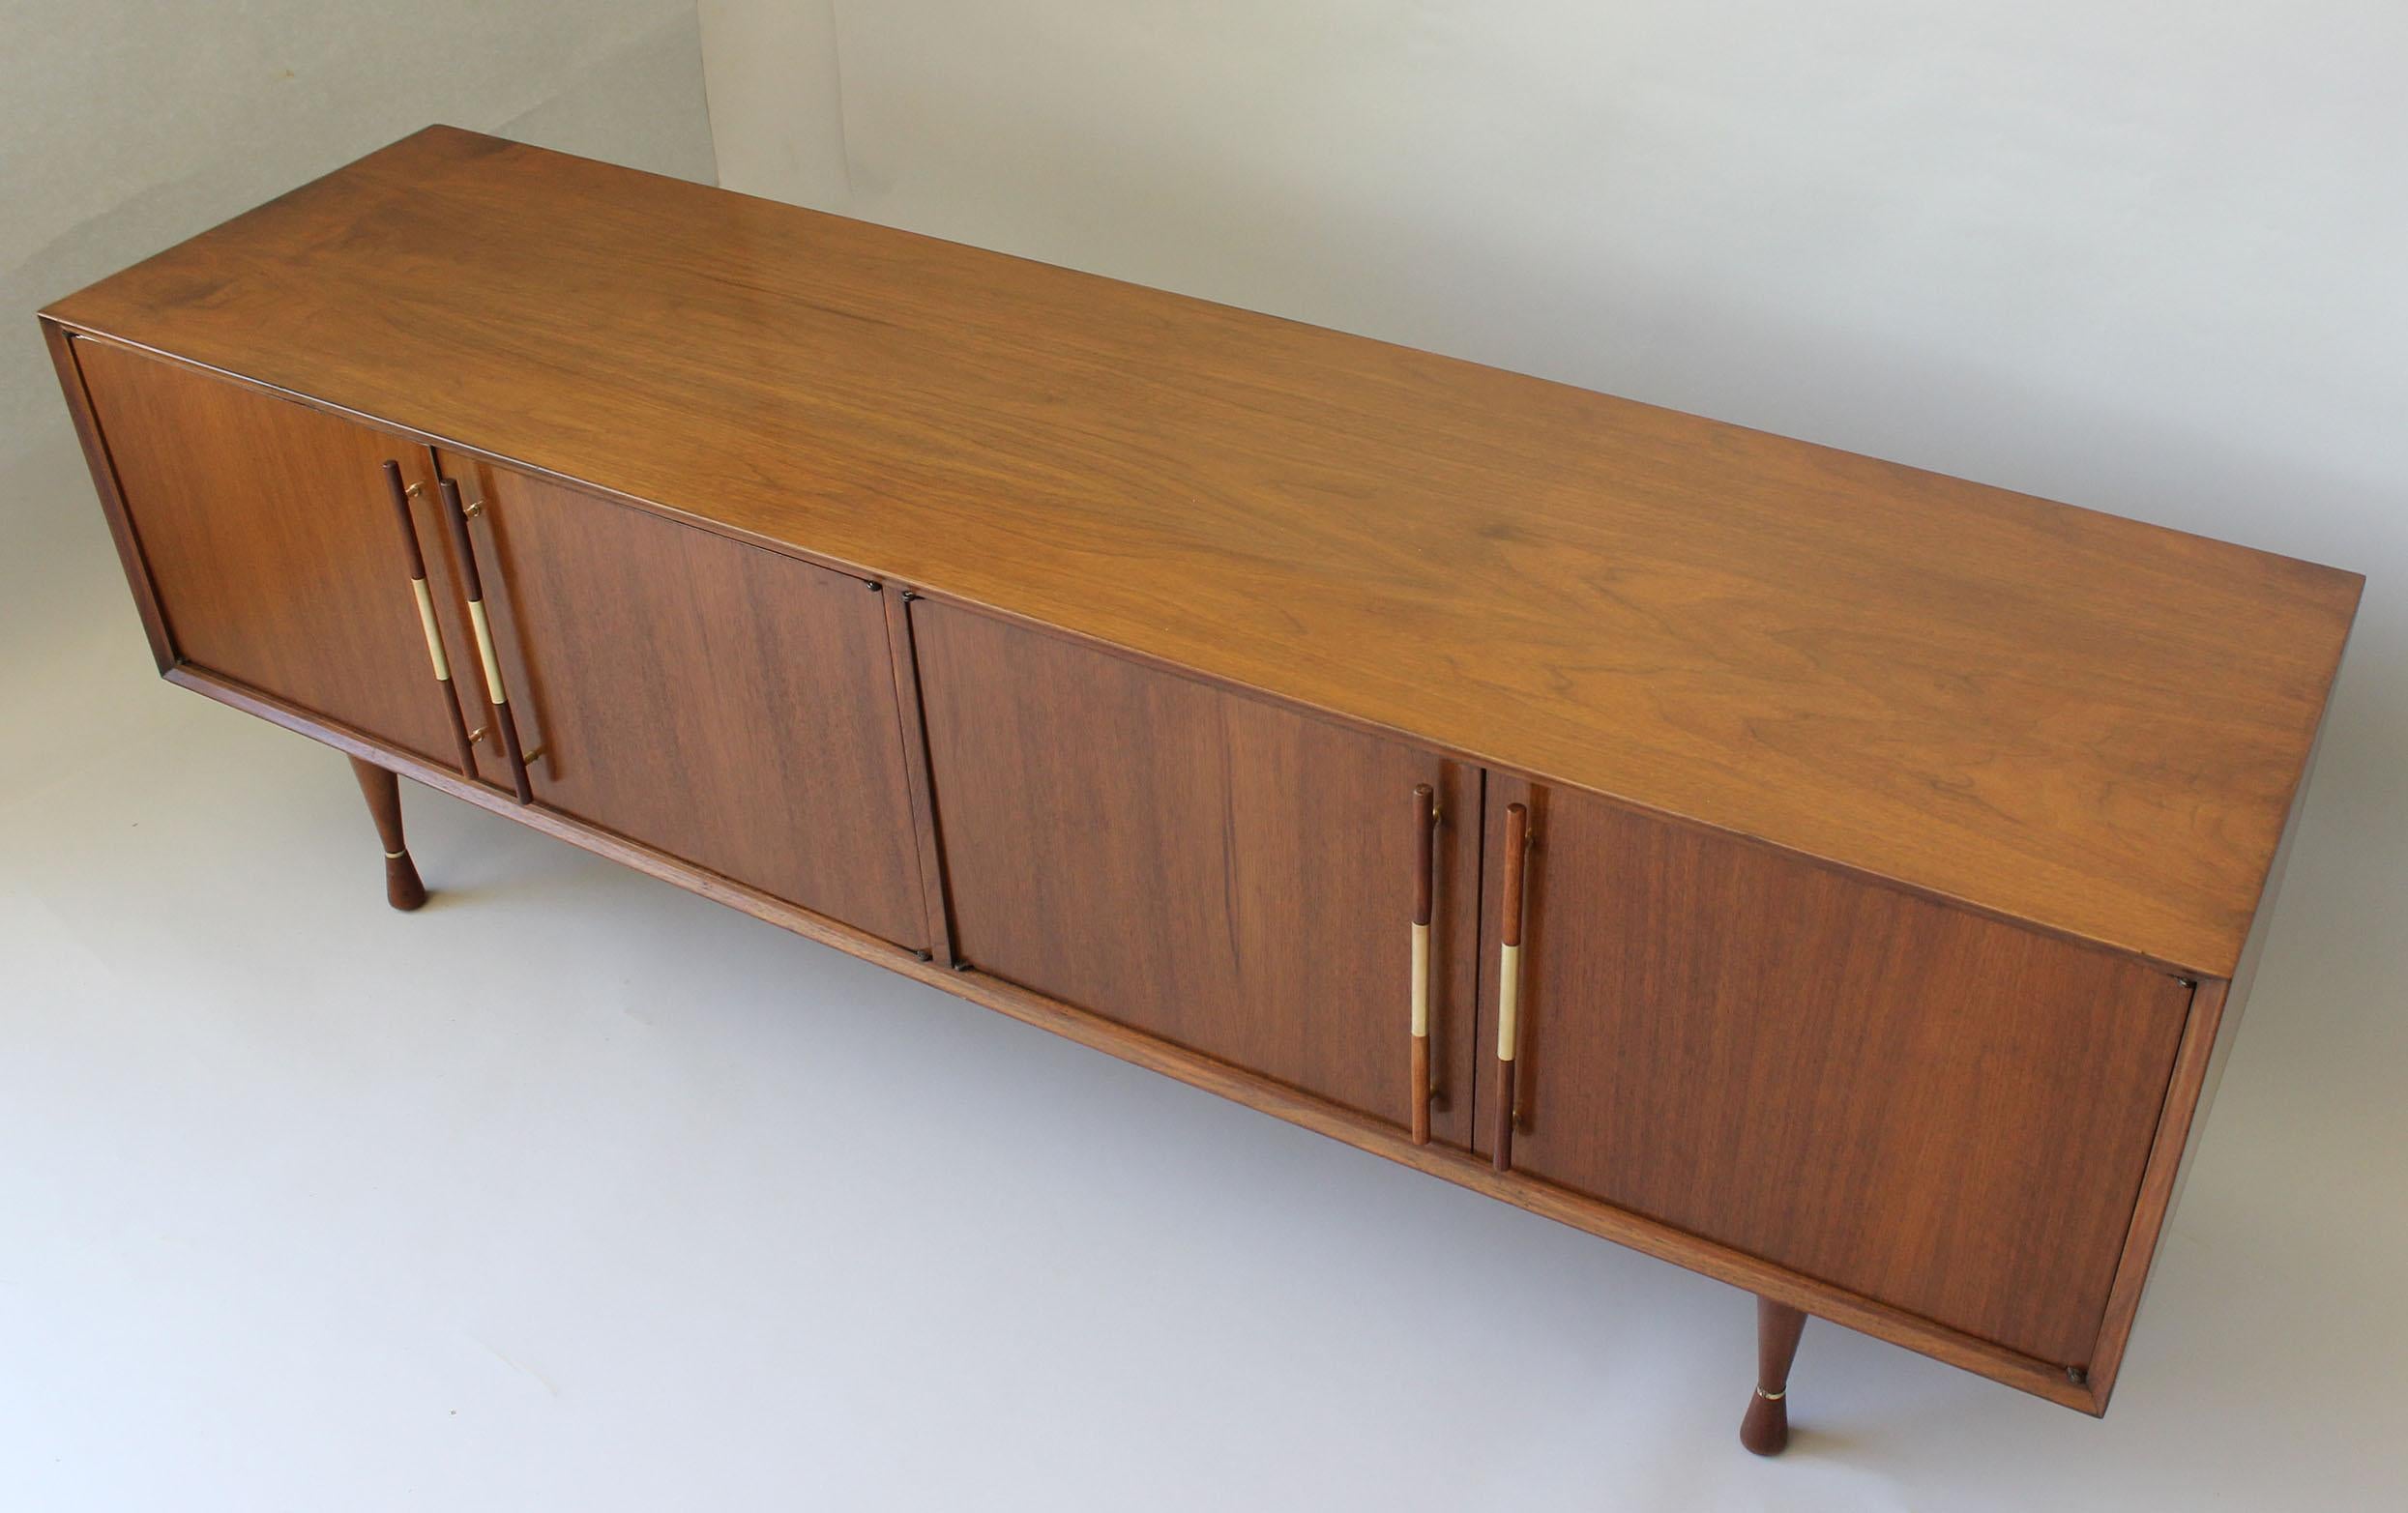 A midcentury Danish style American walnut sideboard with brass details.